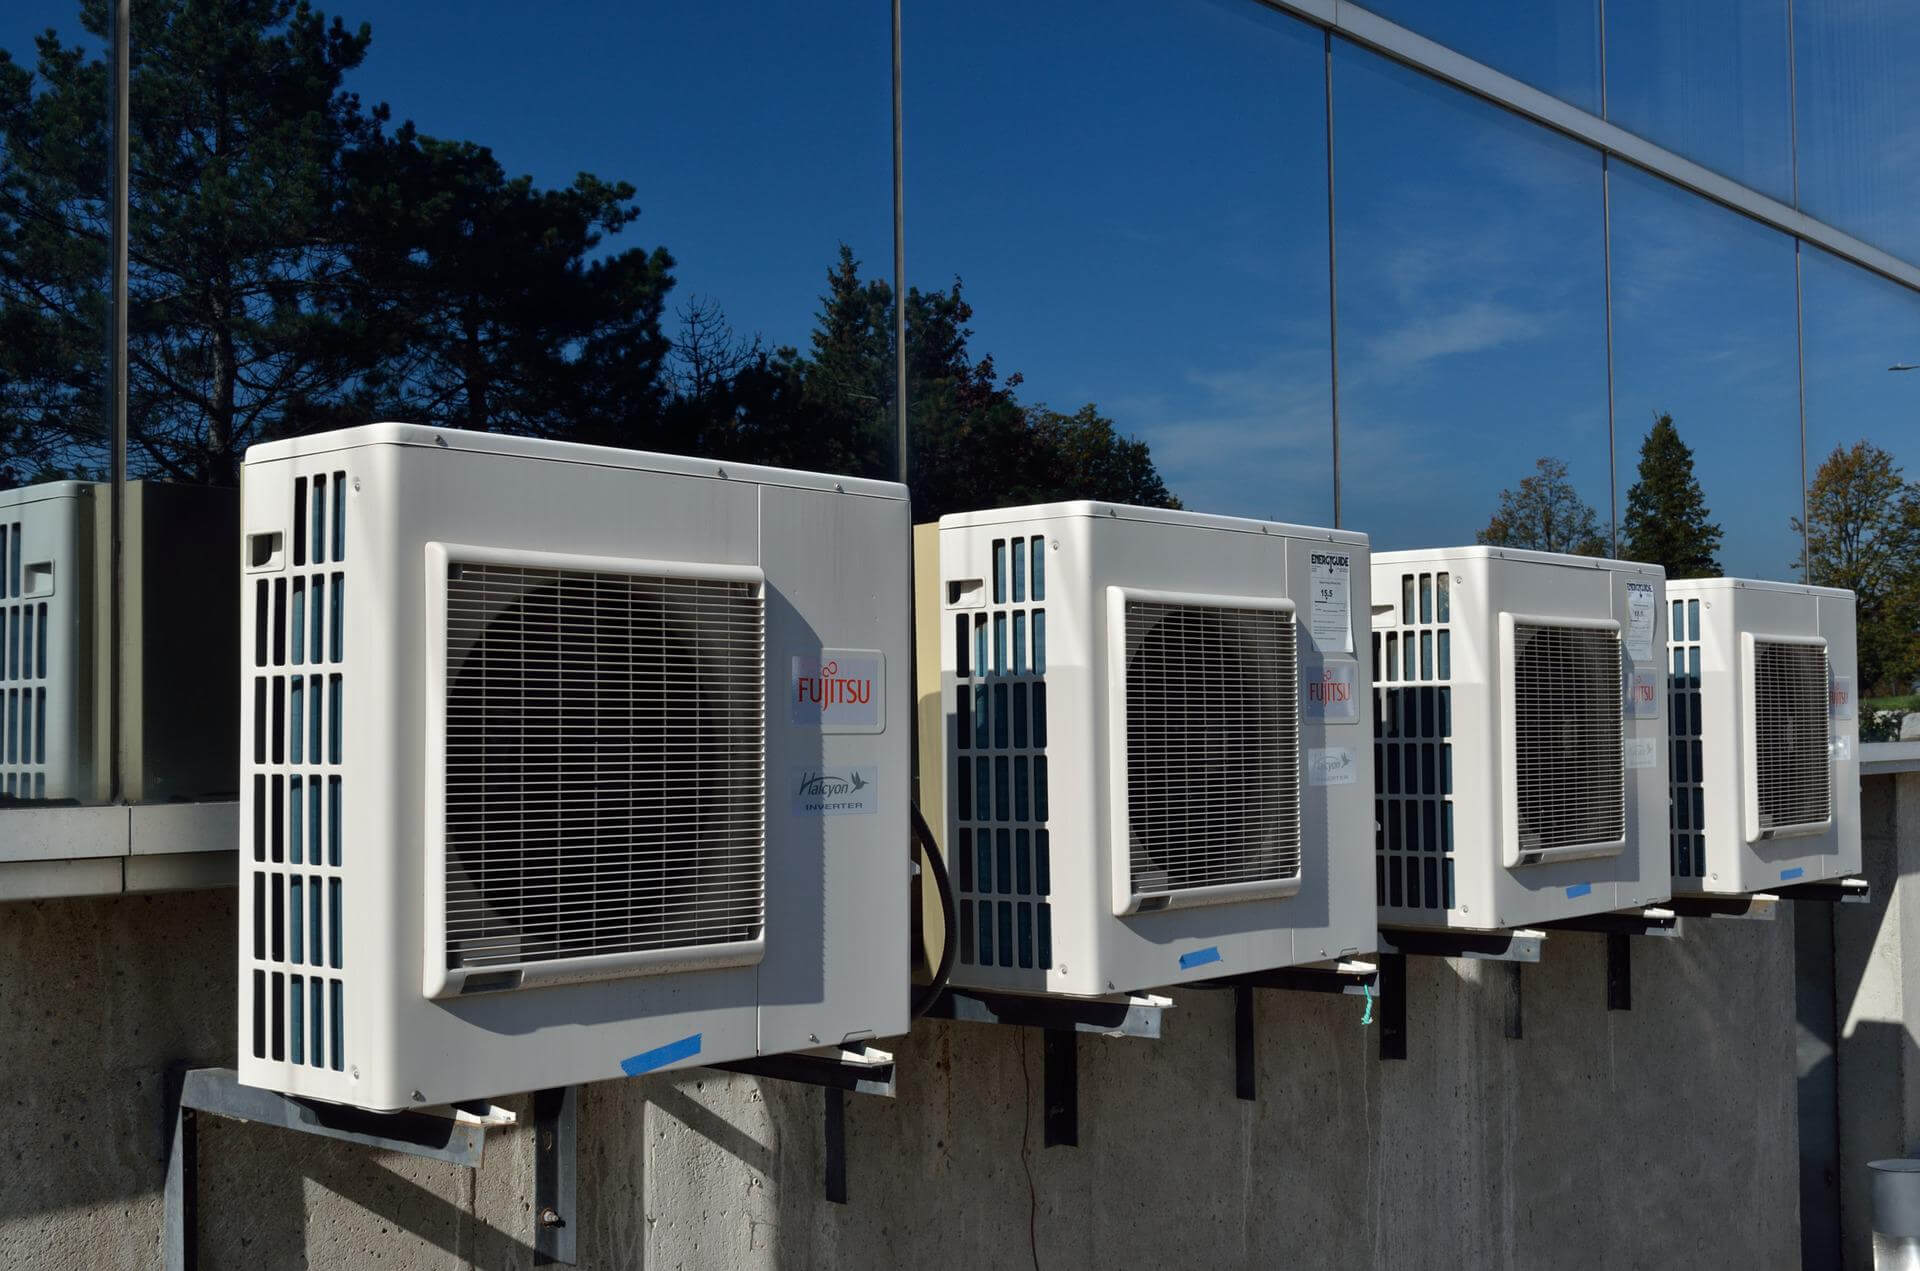 air conditioners